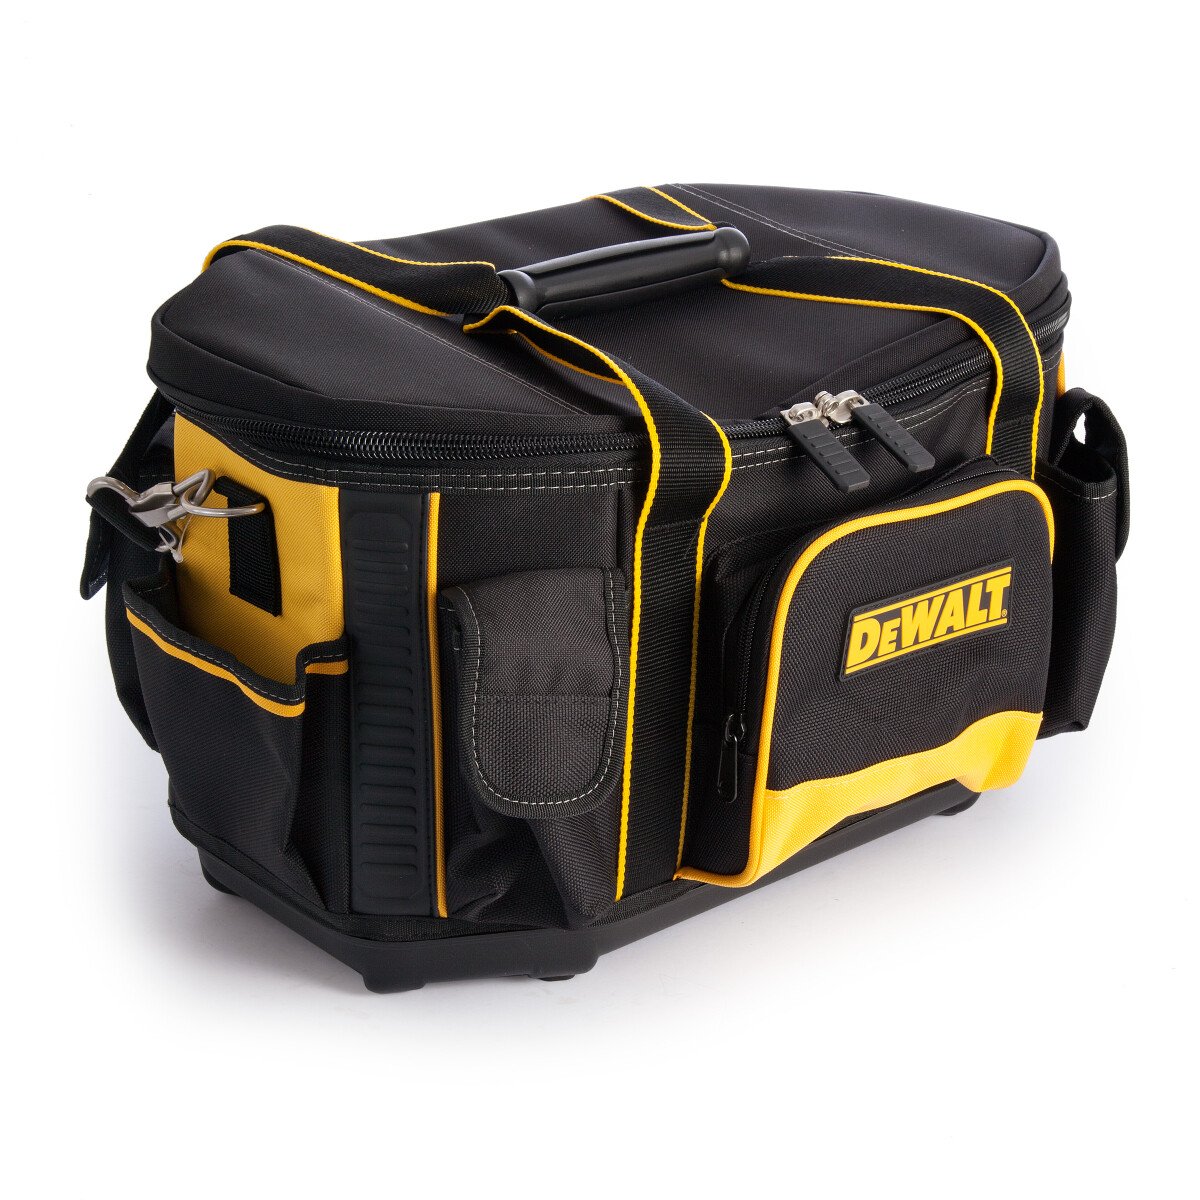 DeWalt 1-79-211 Power Tool Round Top Bag 20 Inches Wide from Lawson HIS